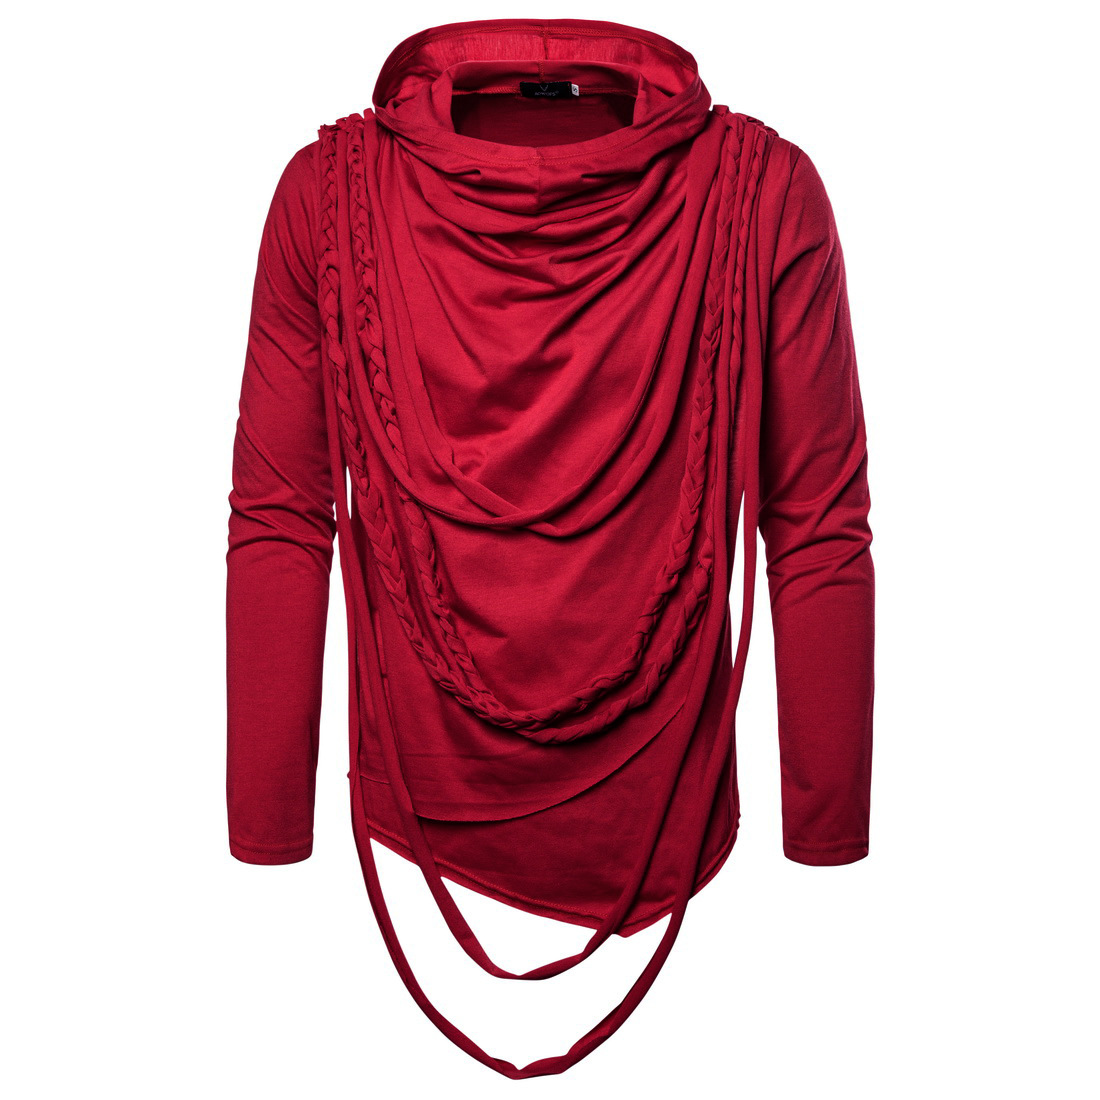  New Fashion Spring Autumn Winter Clothing Trend Long-sleeved Pullovers Men T Shirt Tops red